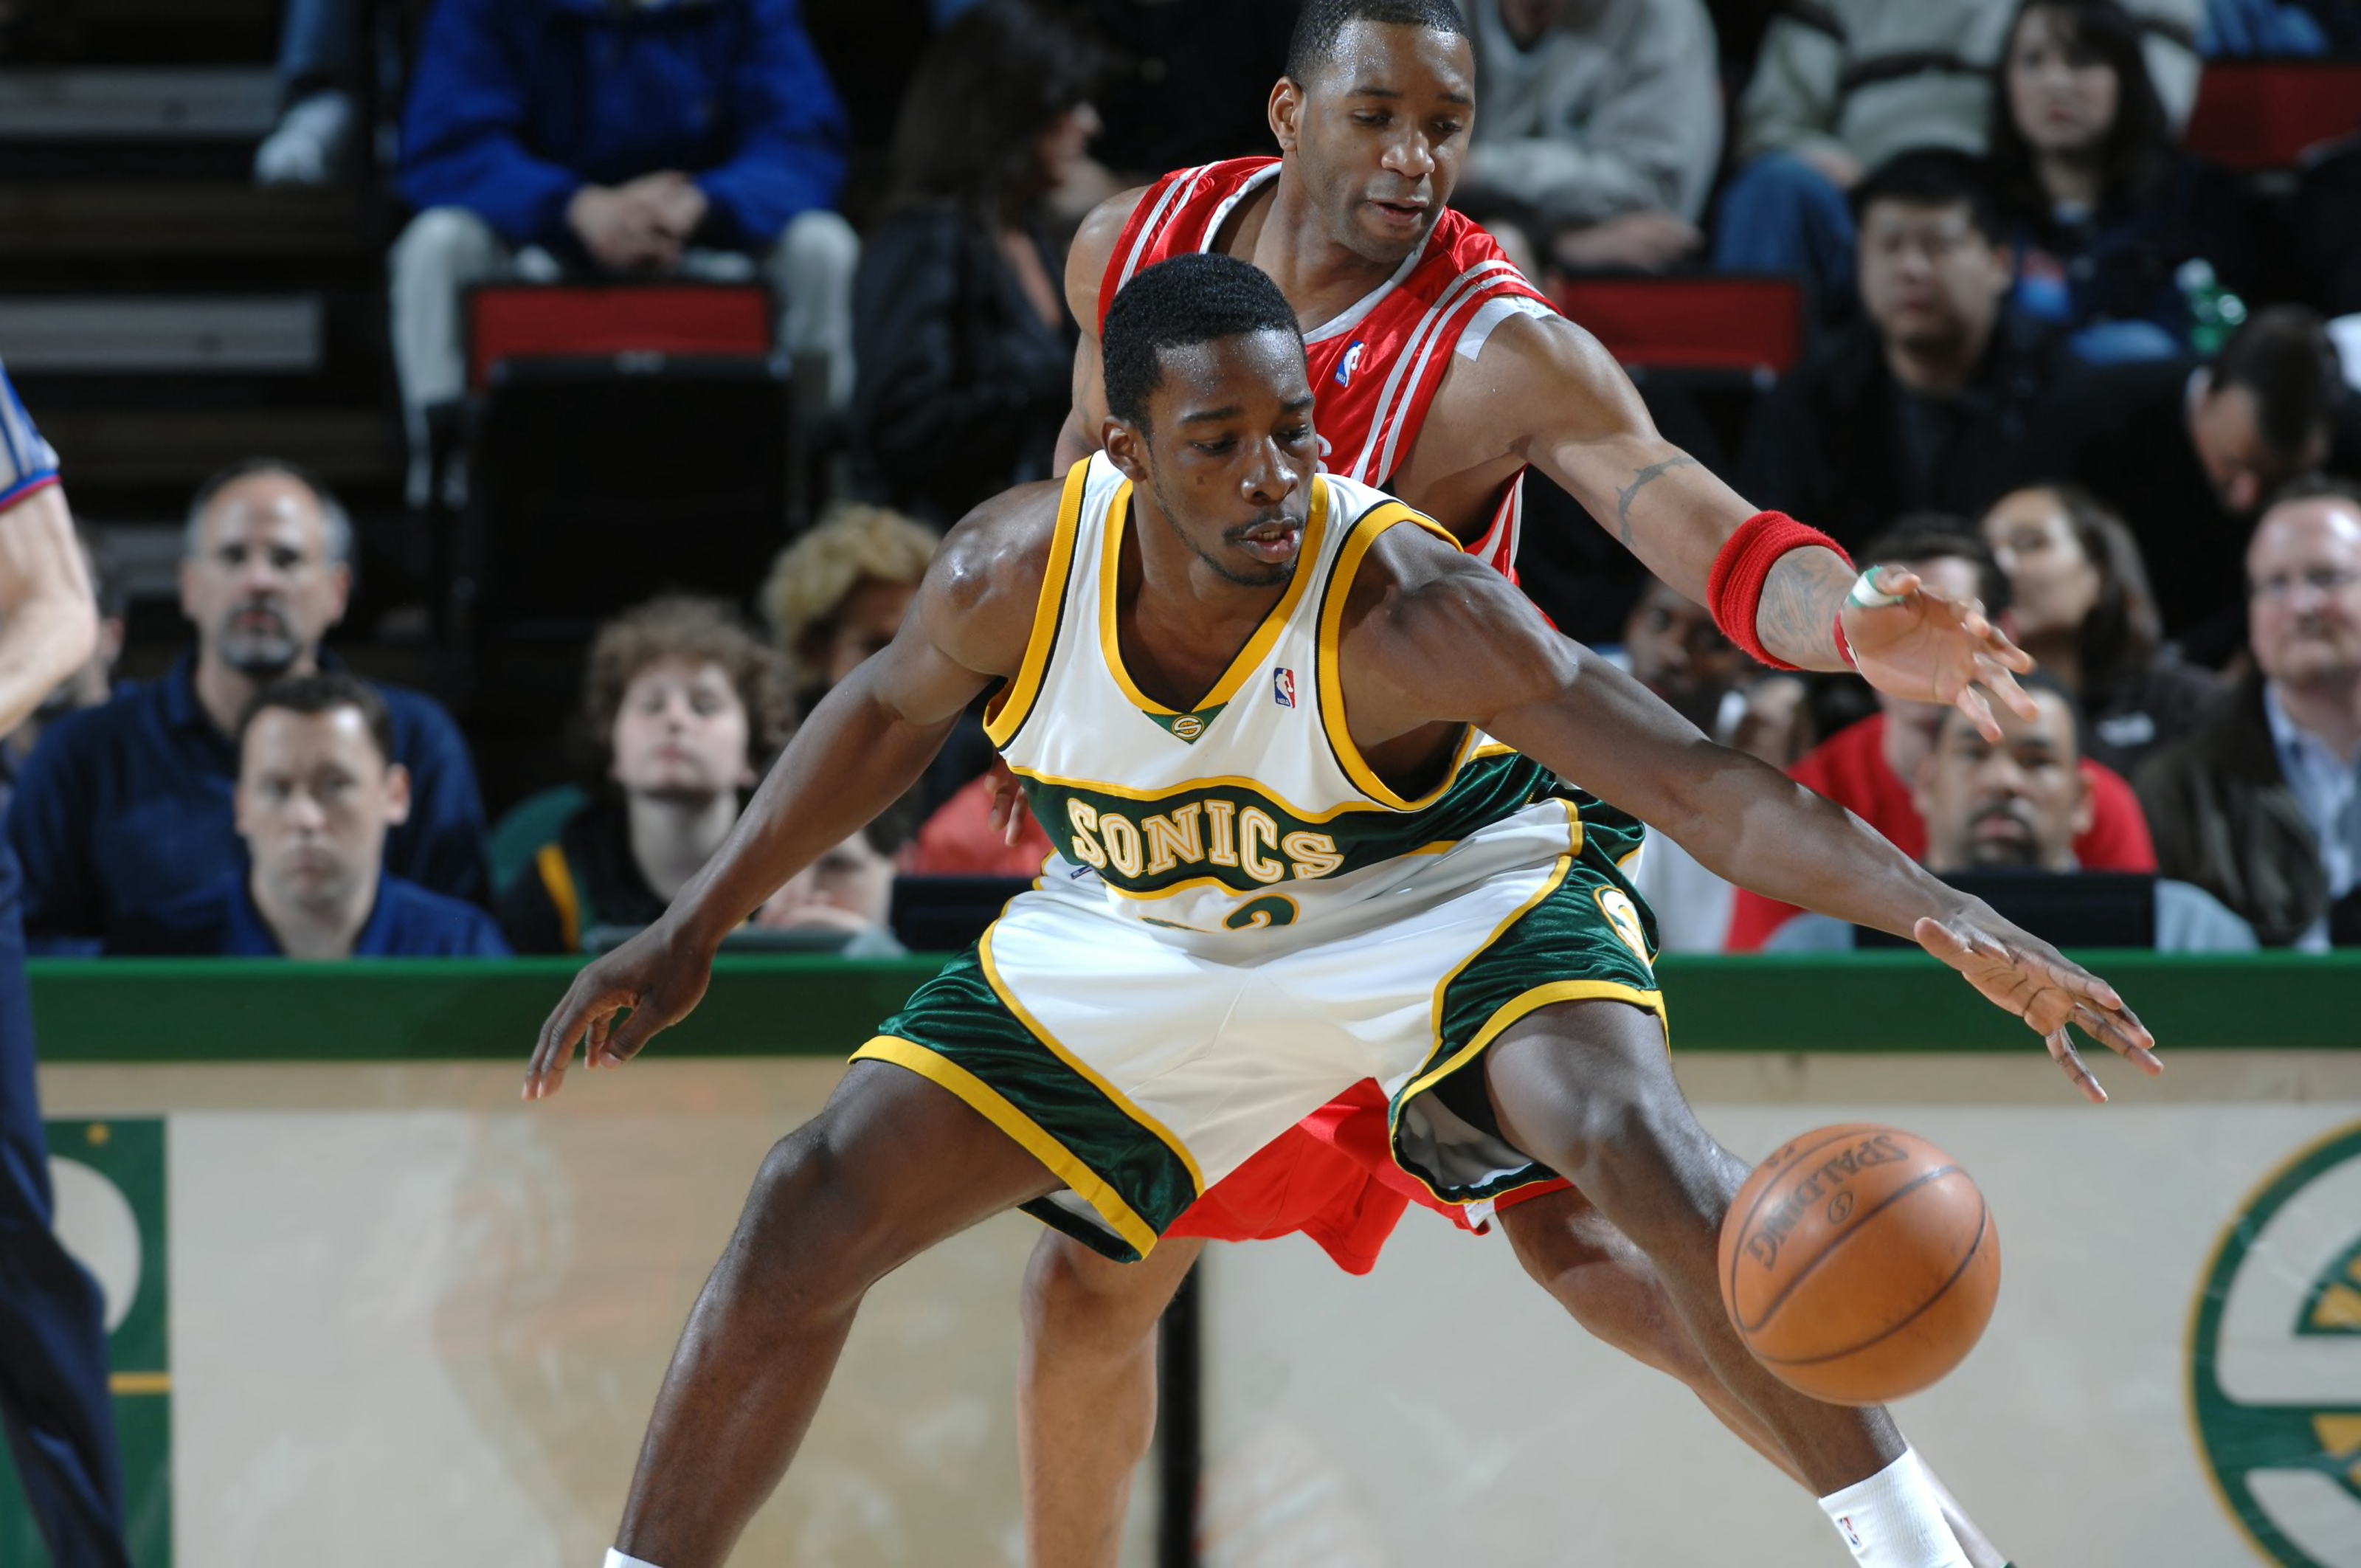 Settling the OKC Thunder and Seattle Supersonics debate